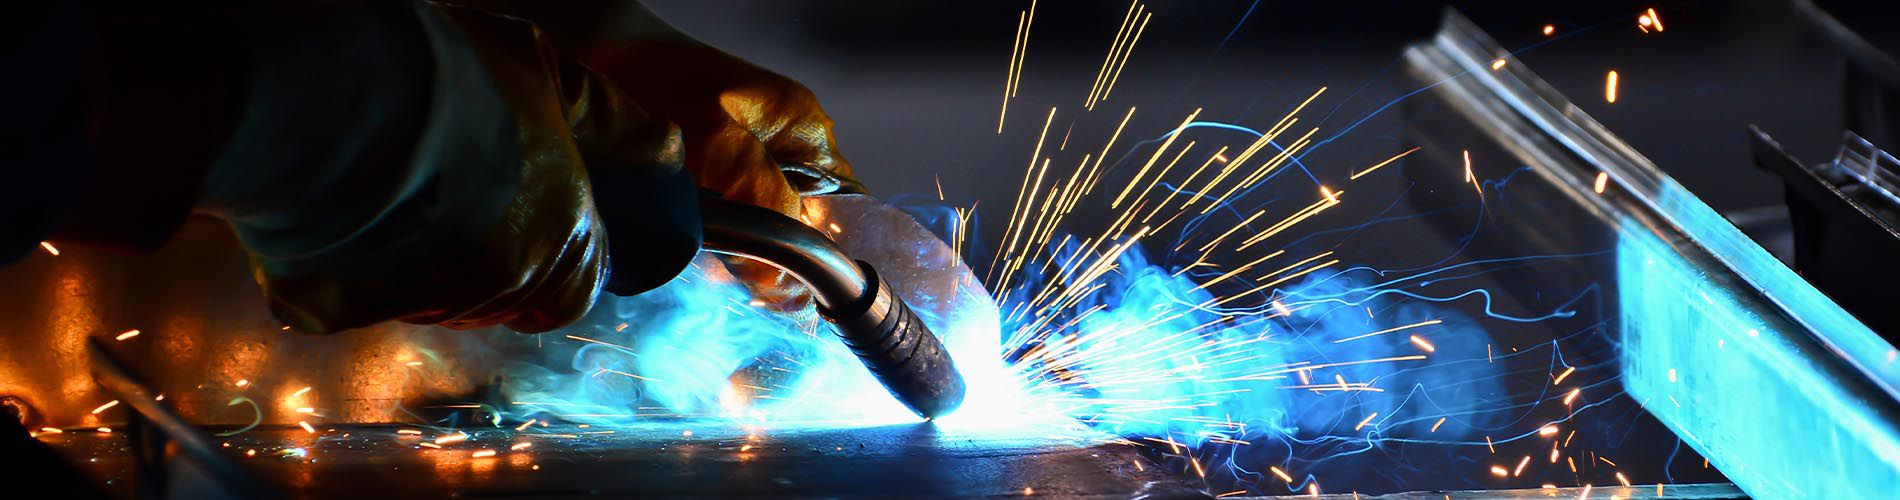 A photo of a welding tool in use, causing sparks to fly.